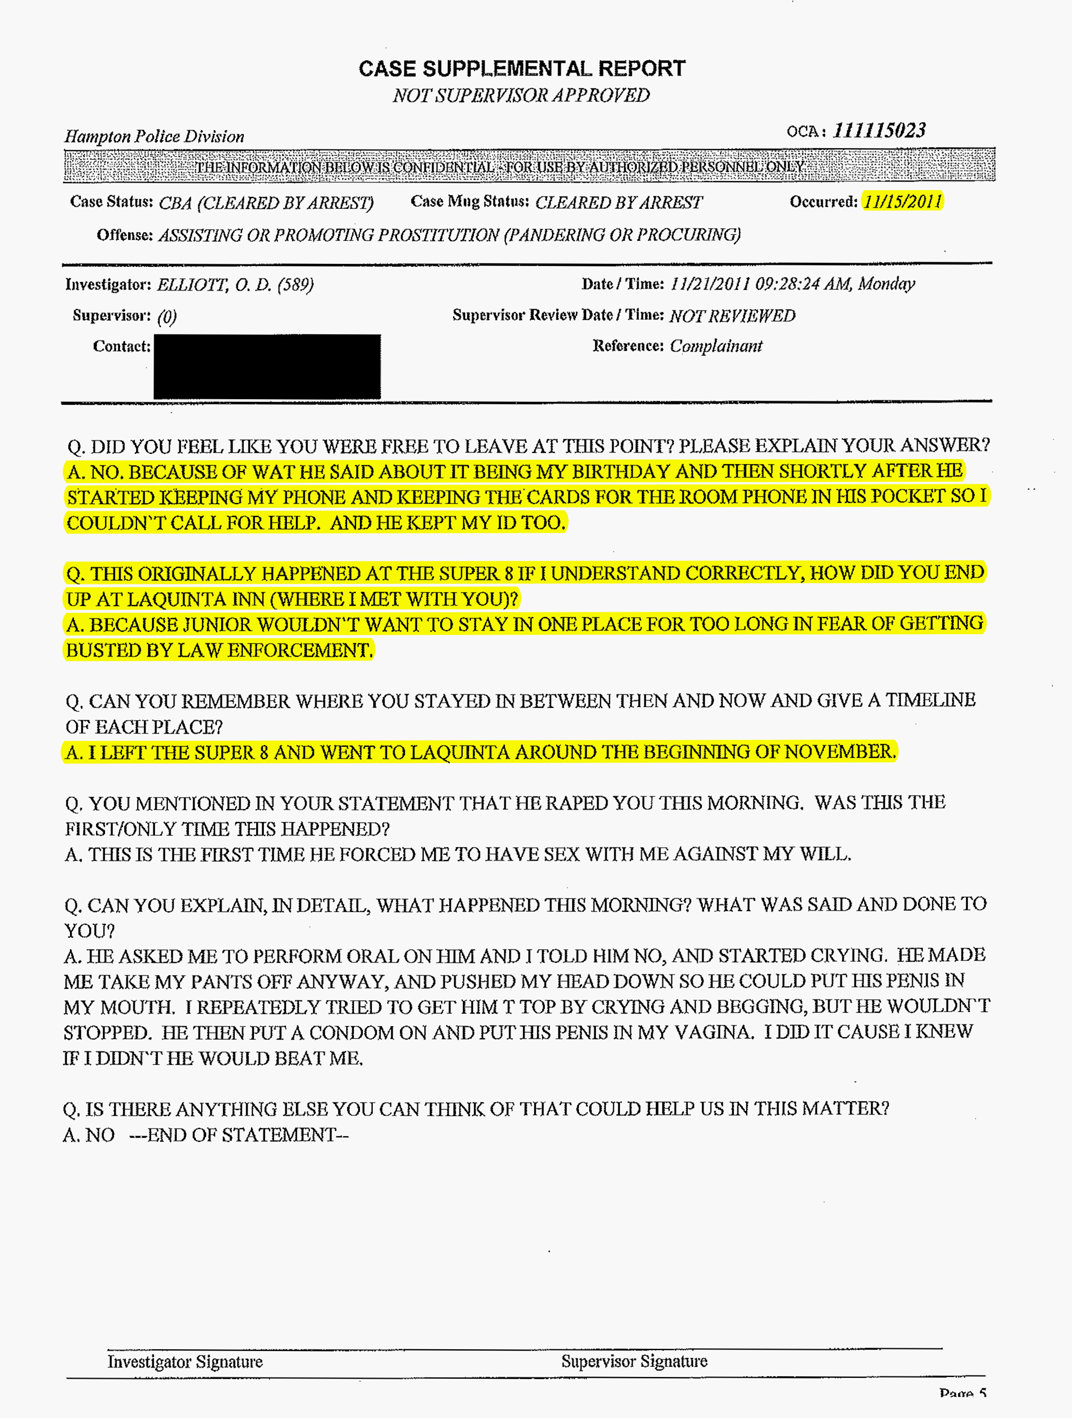 Hampton police report about Ron Miscavige hooker page 6